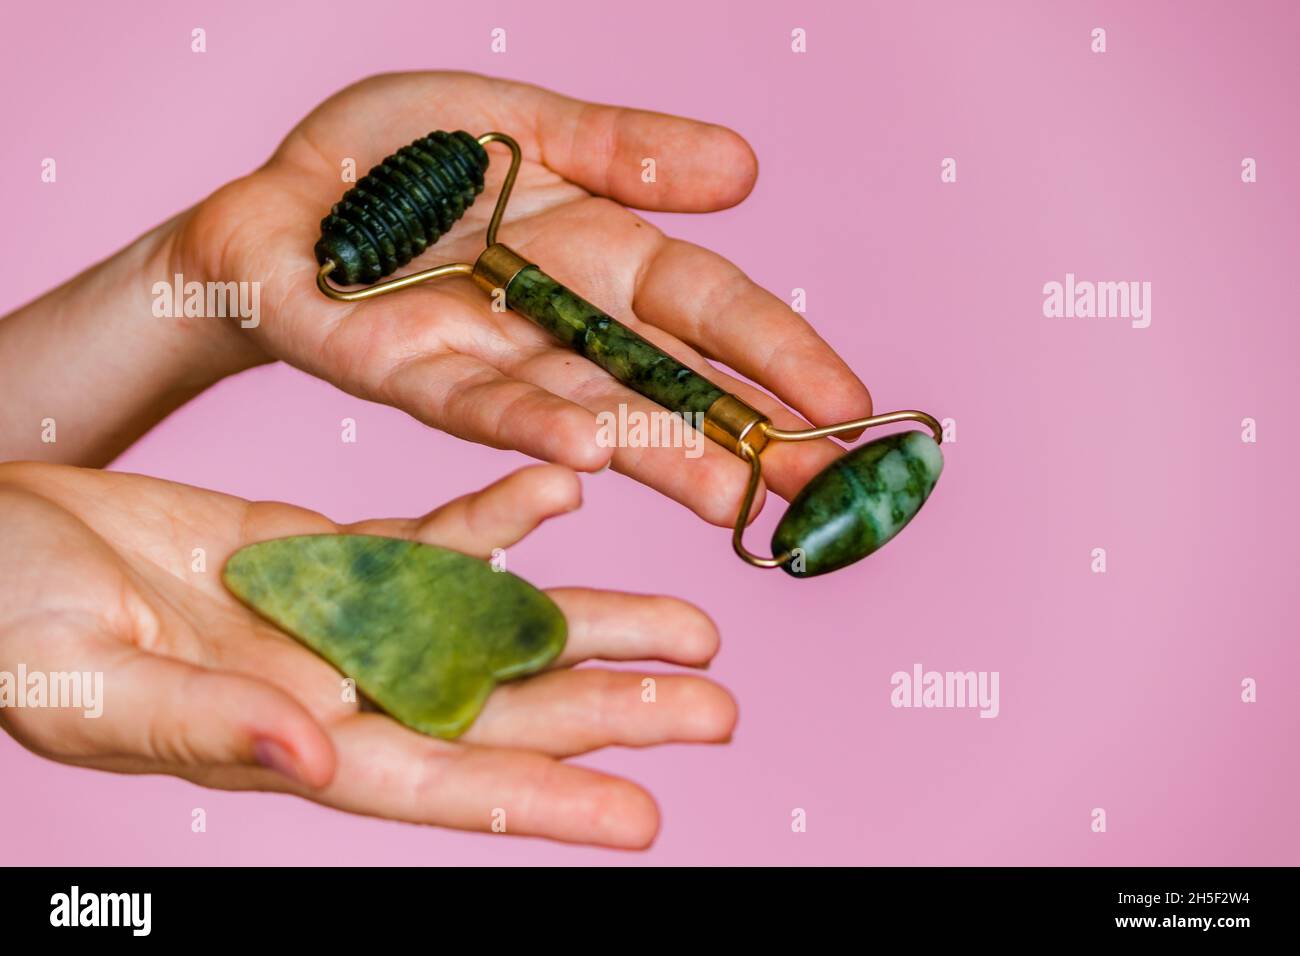 Jade roller and scruber for facial massage in female hands on a pink background. Stock Photo